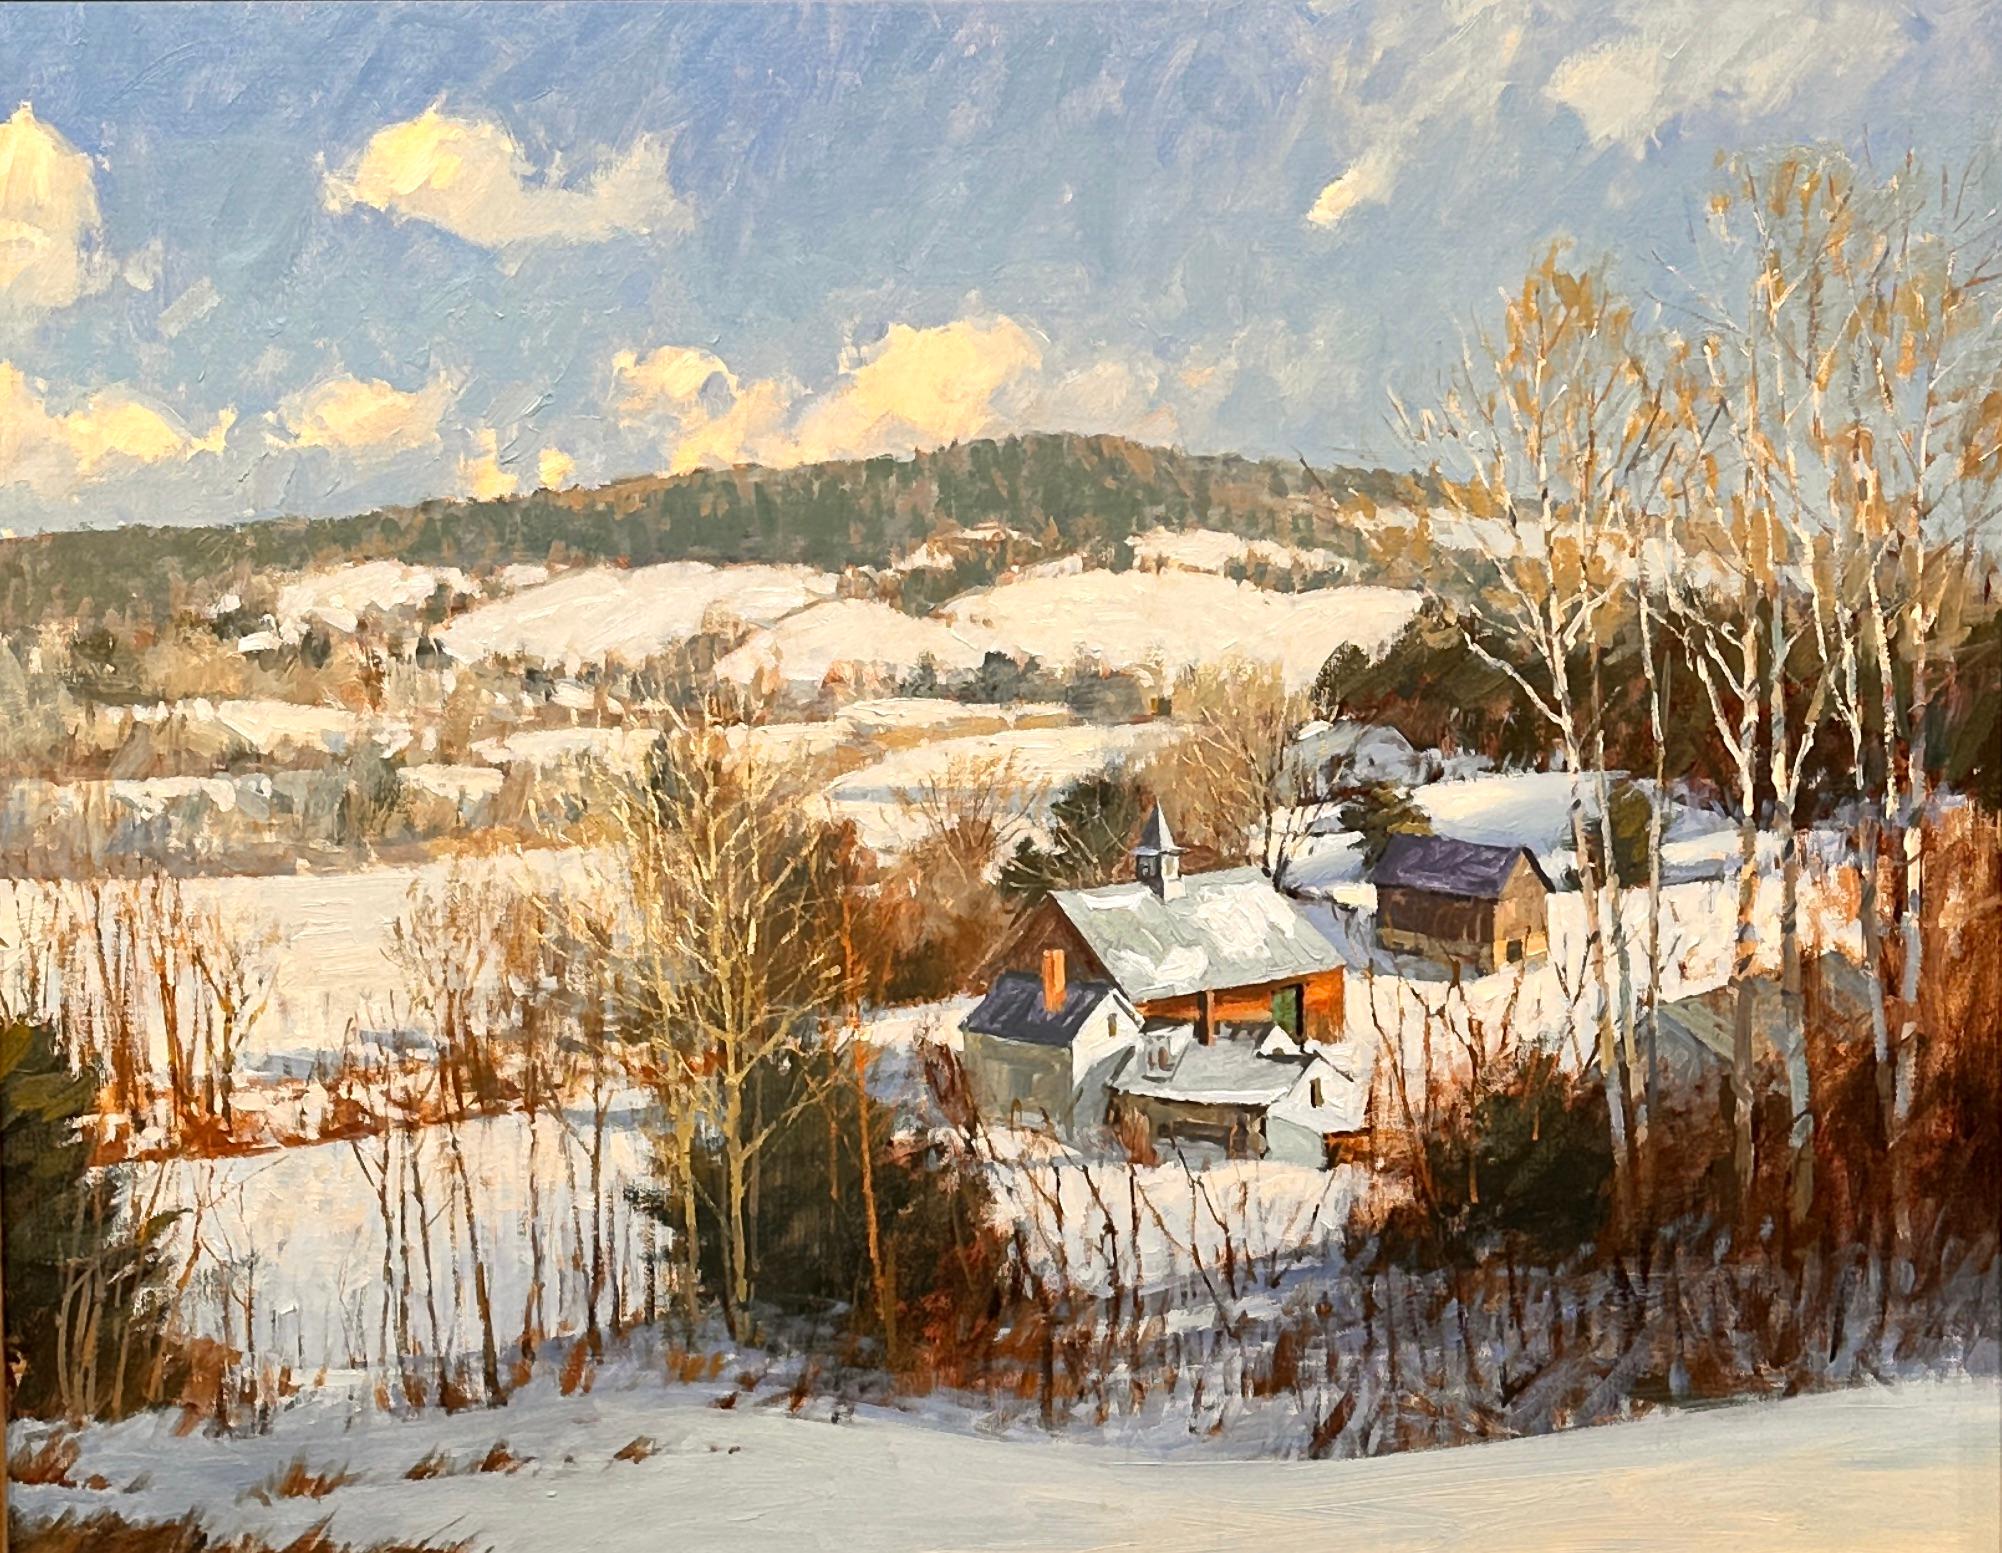 "New England Farm Landscape in Snow" by David Bareford possesses a combination of captivating composition, mastery of light and atmosphere, emotional resonance, unique style, and the artist's established reputation. These factors contribute to its